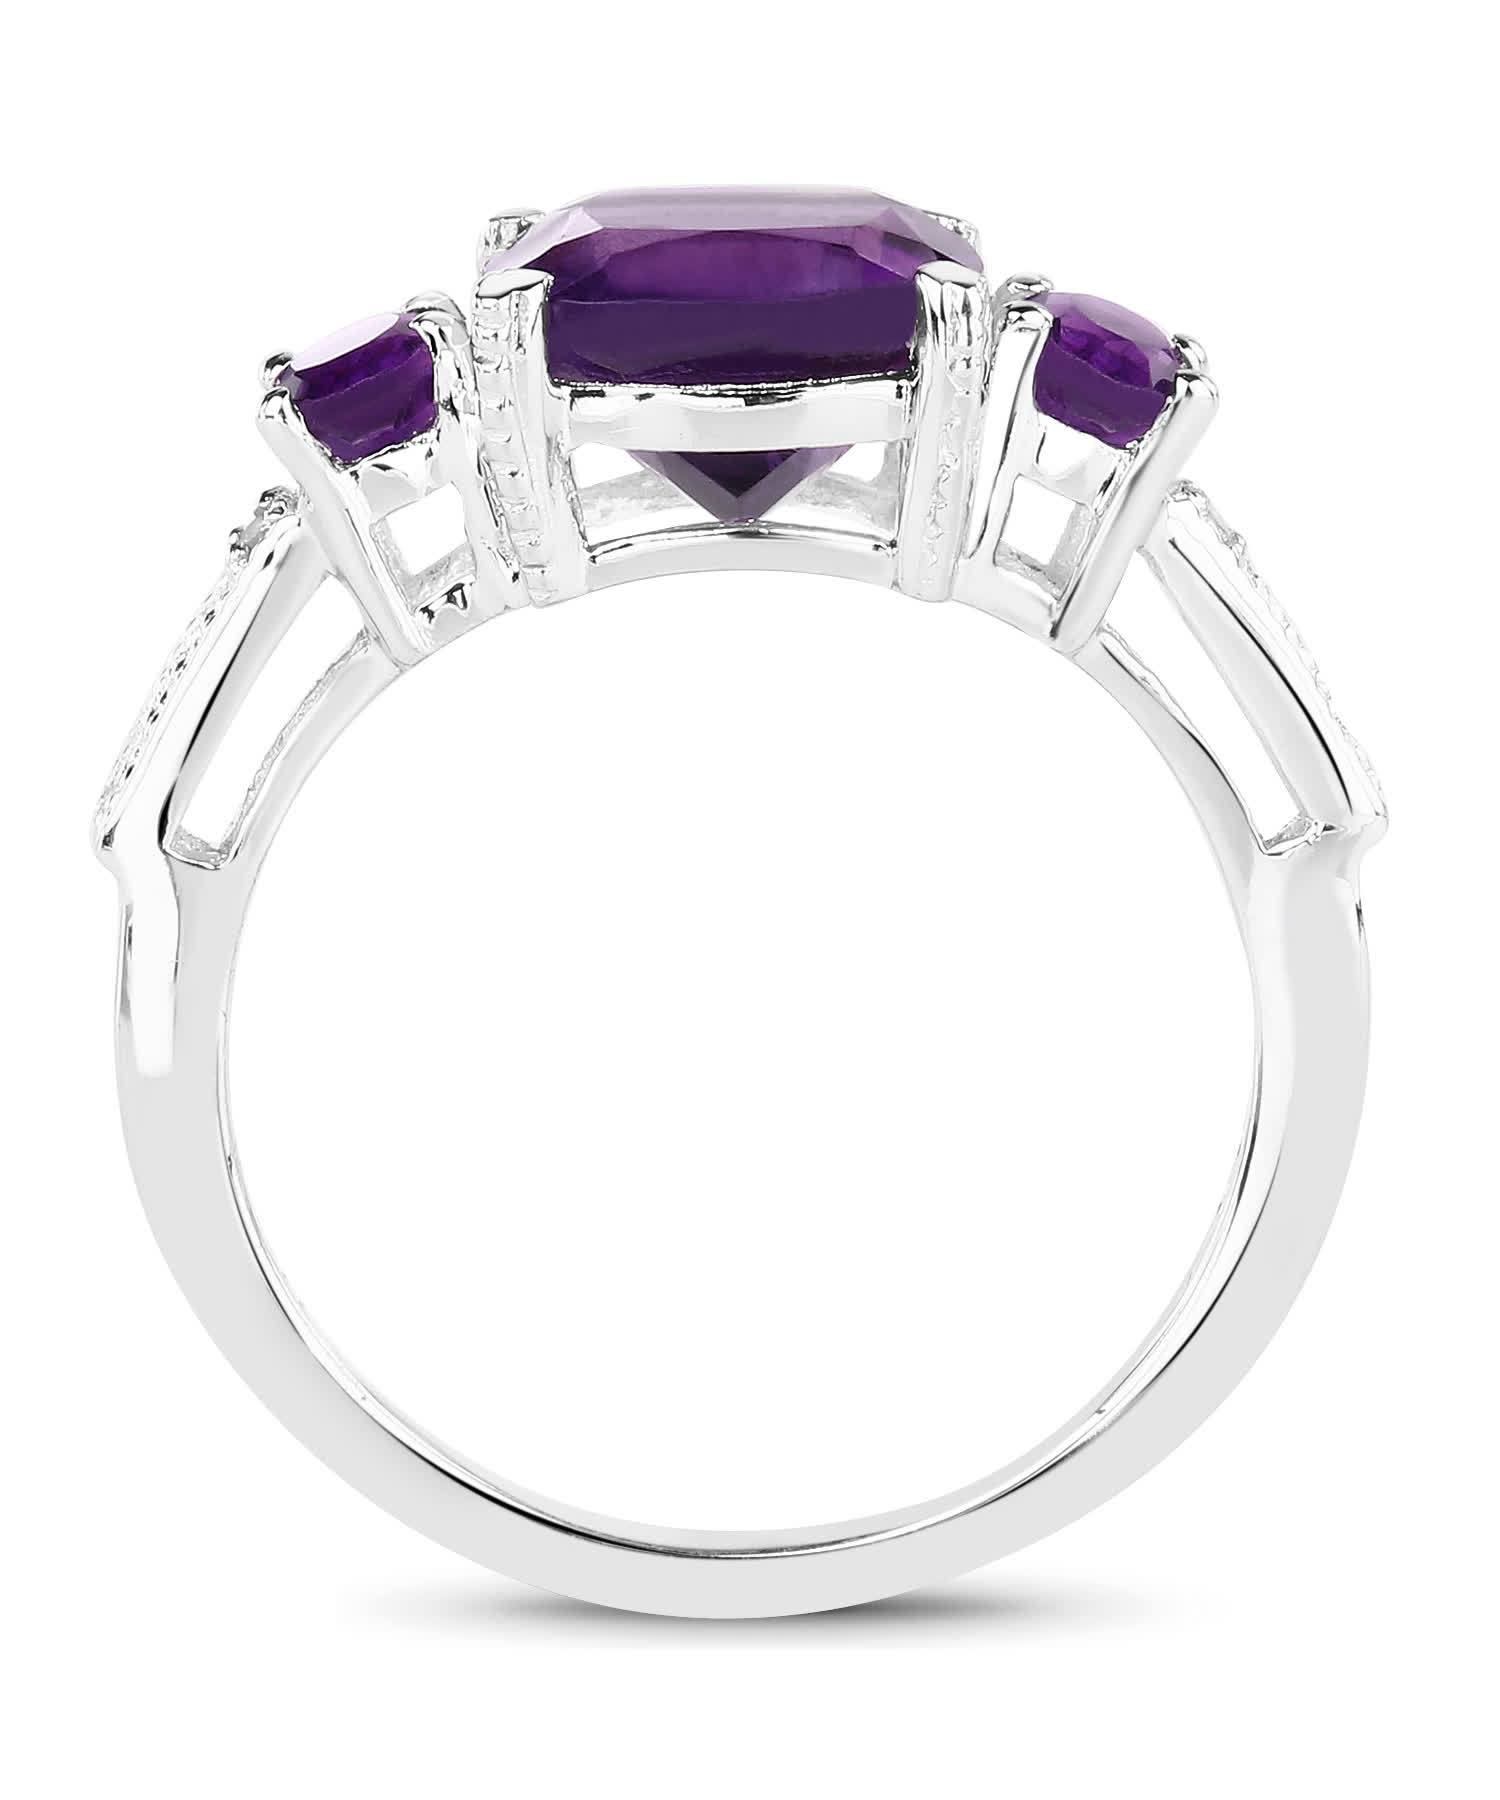 2.38ctw Natural Amethyst and Topaz Rhodium Plated 925 Sterling Silver Three-Stone Ring View 2